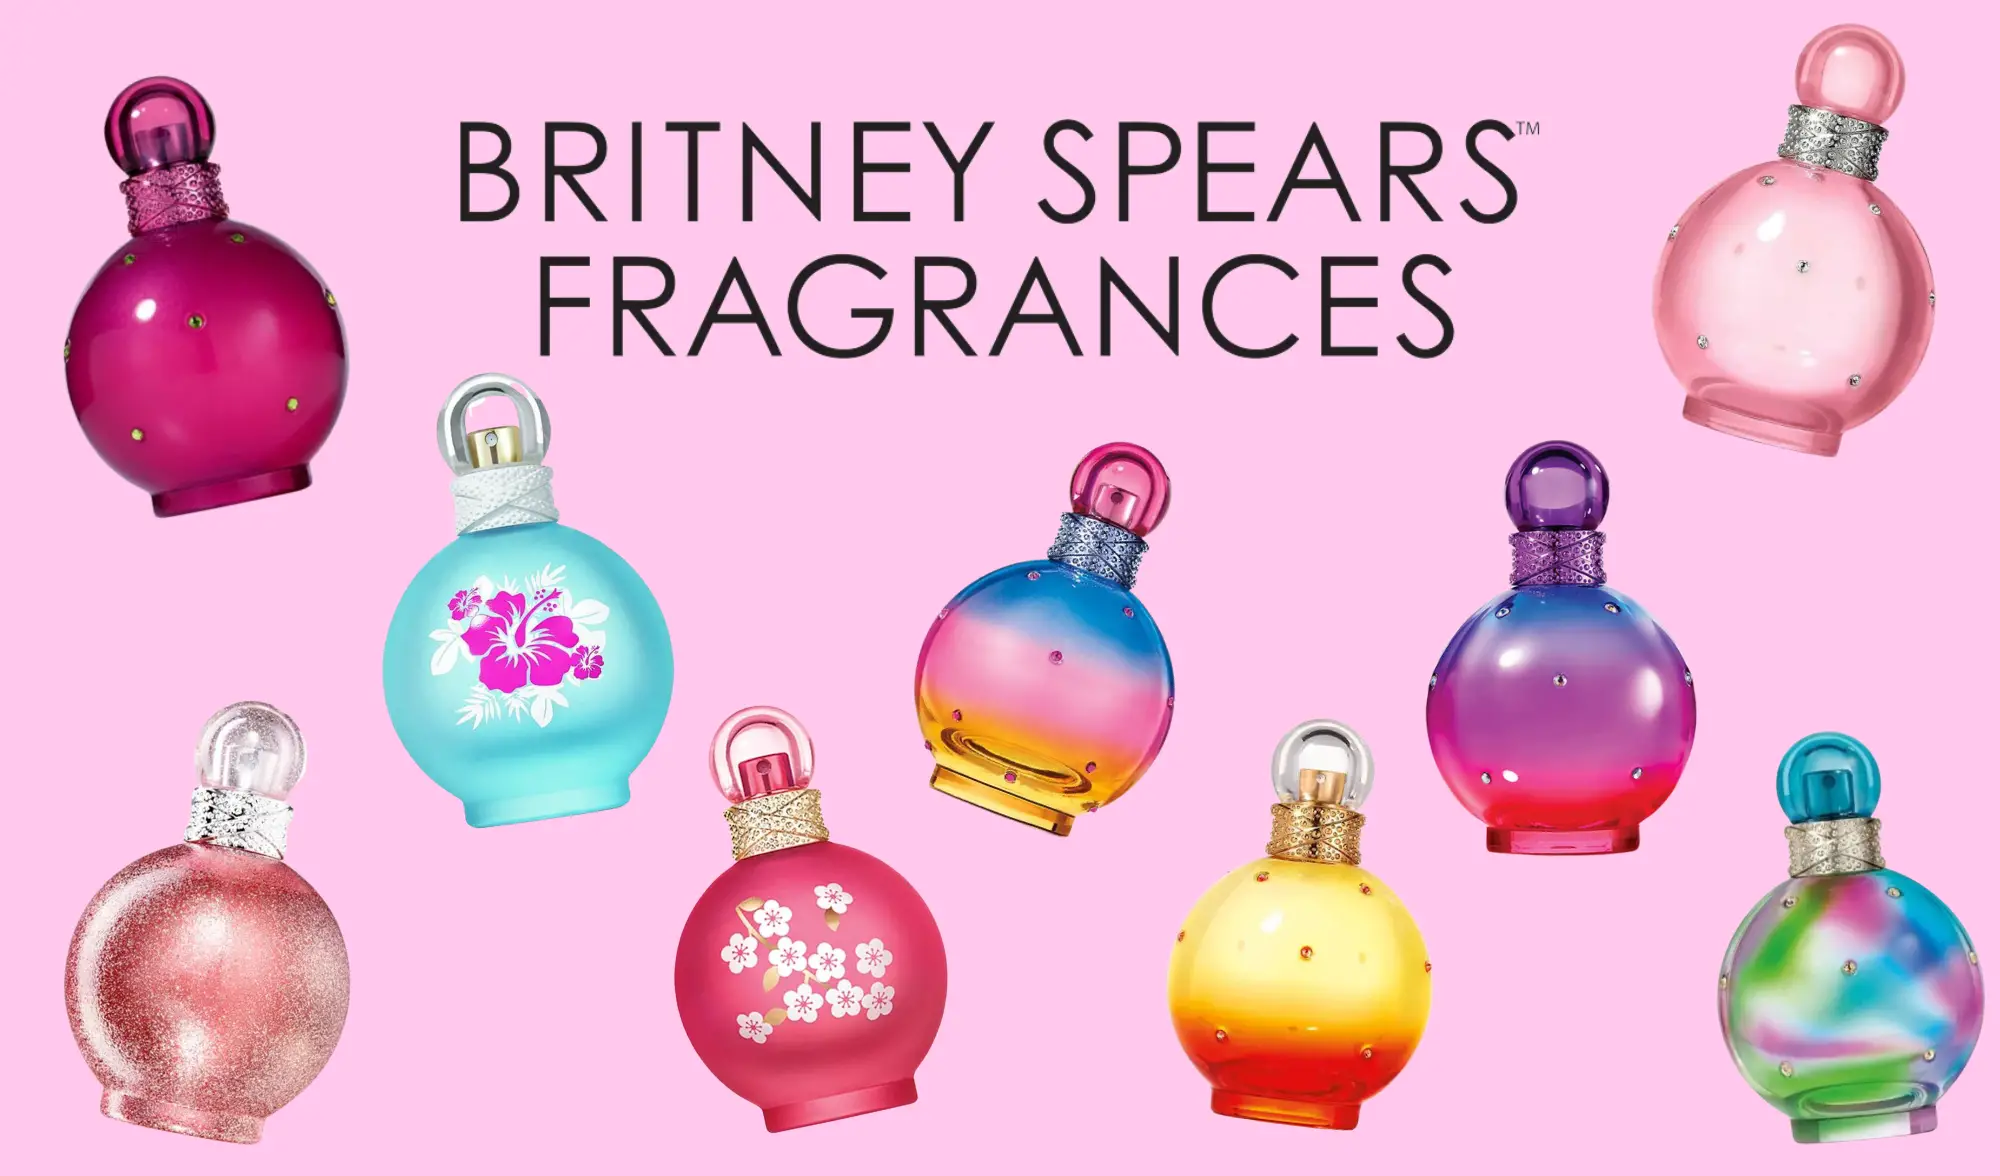 A Guide To Every Britney Spears Fantasy Perfume Ever!